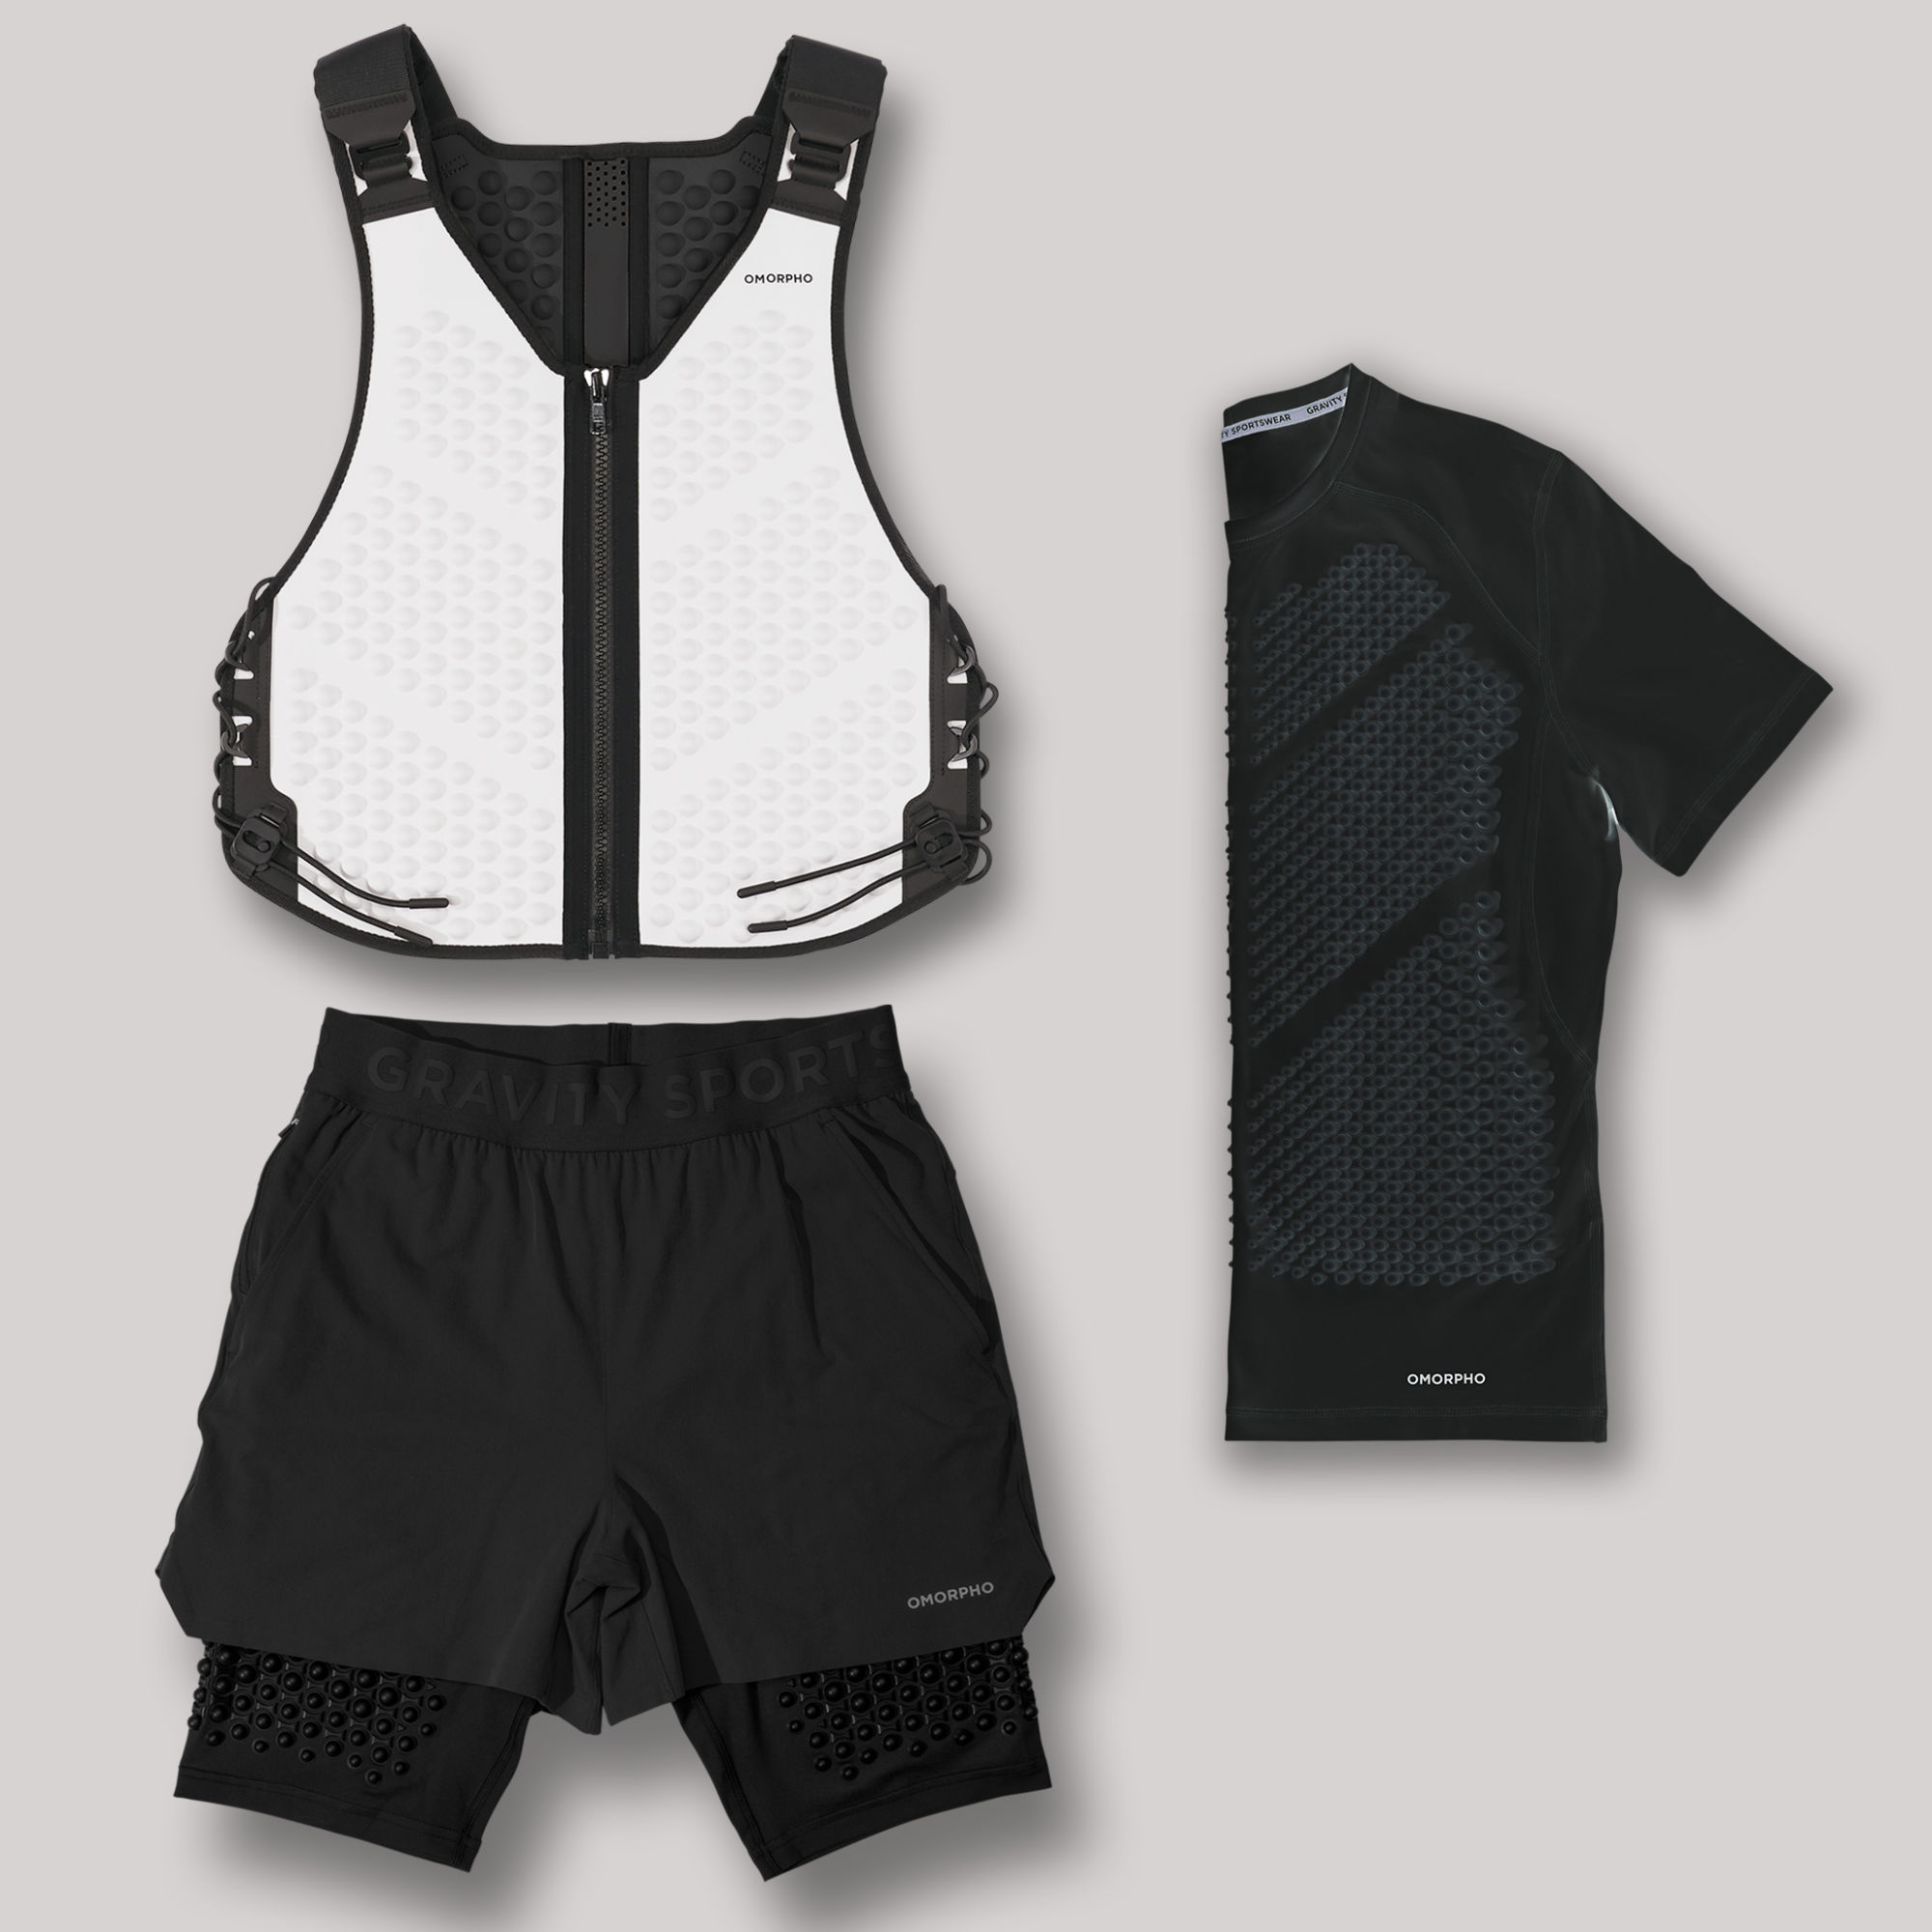 Laydown - OMORPHO M Pro Bundle - G-Vest Cloud, G-Top SS and G-Short Black, weighted vest and shorts